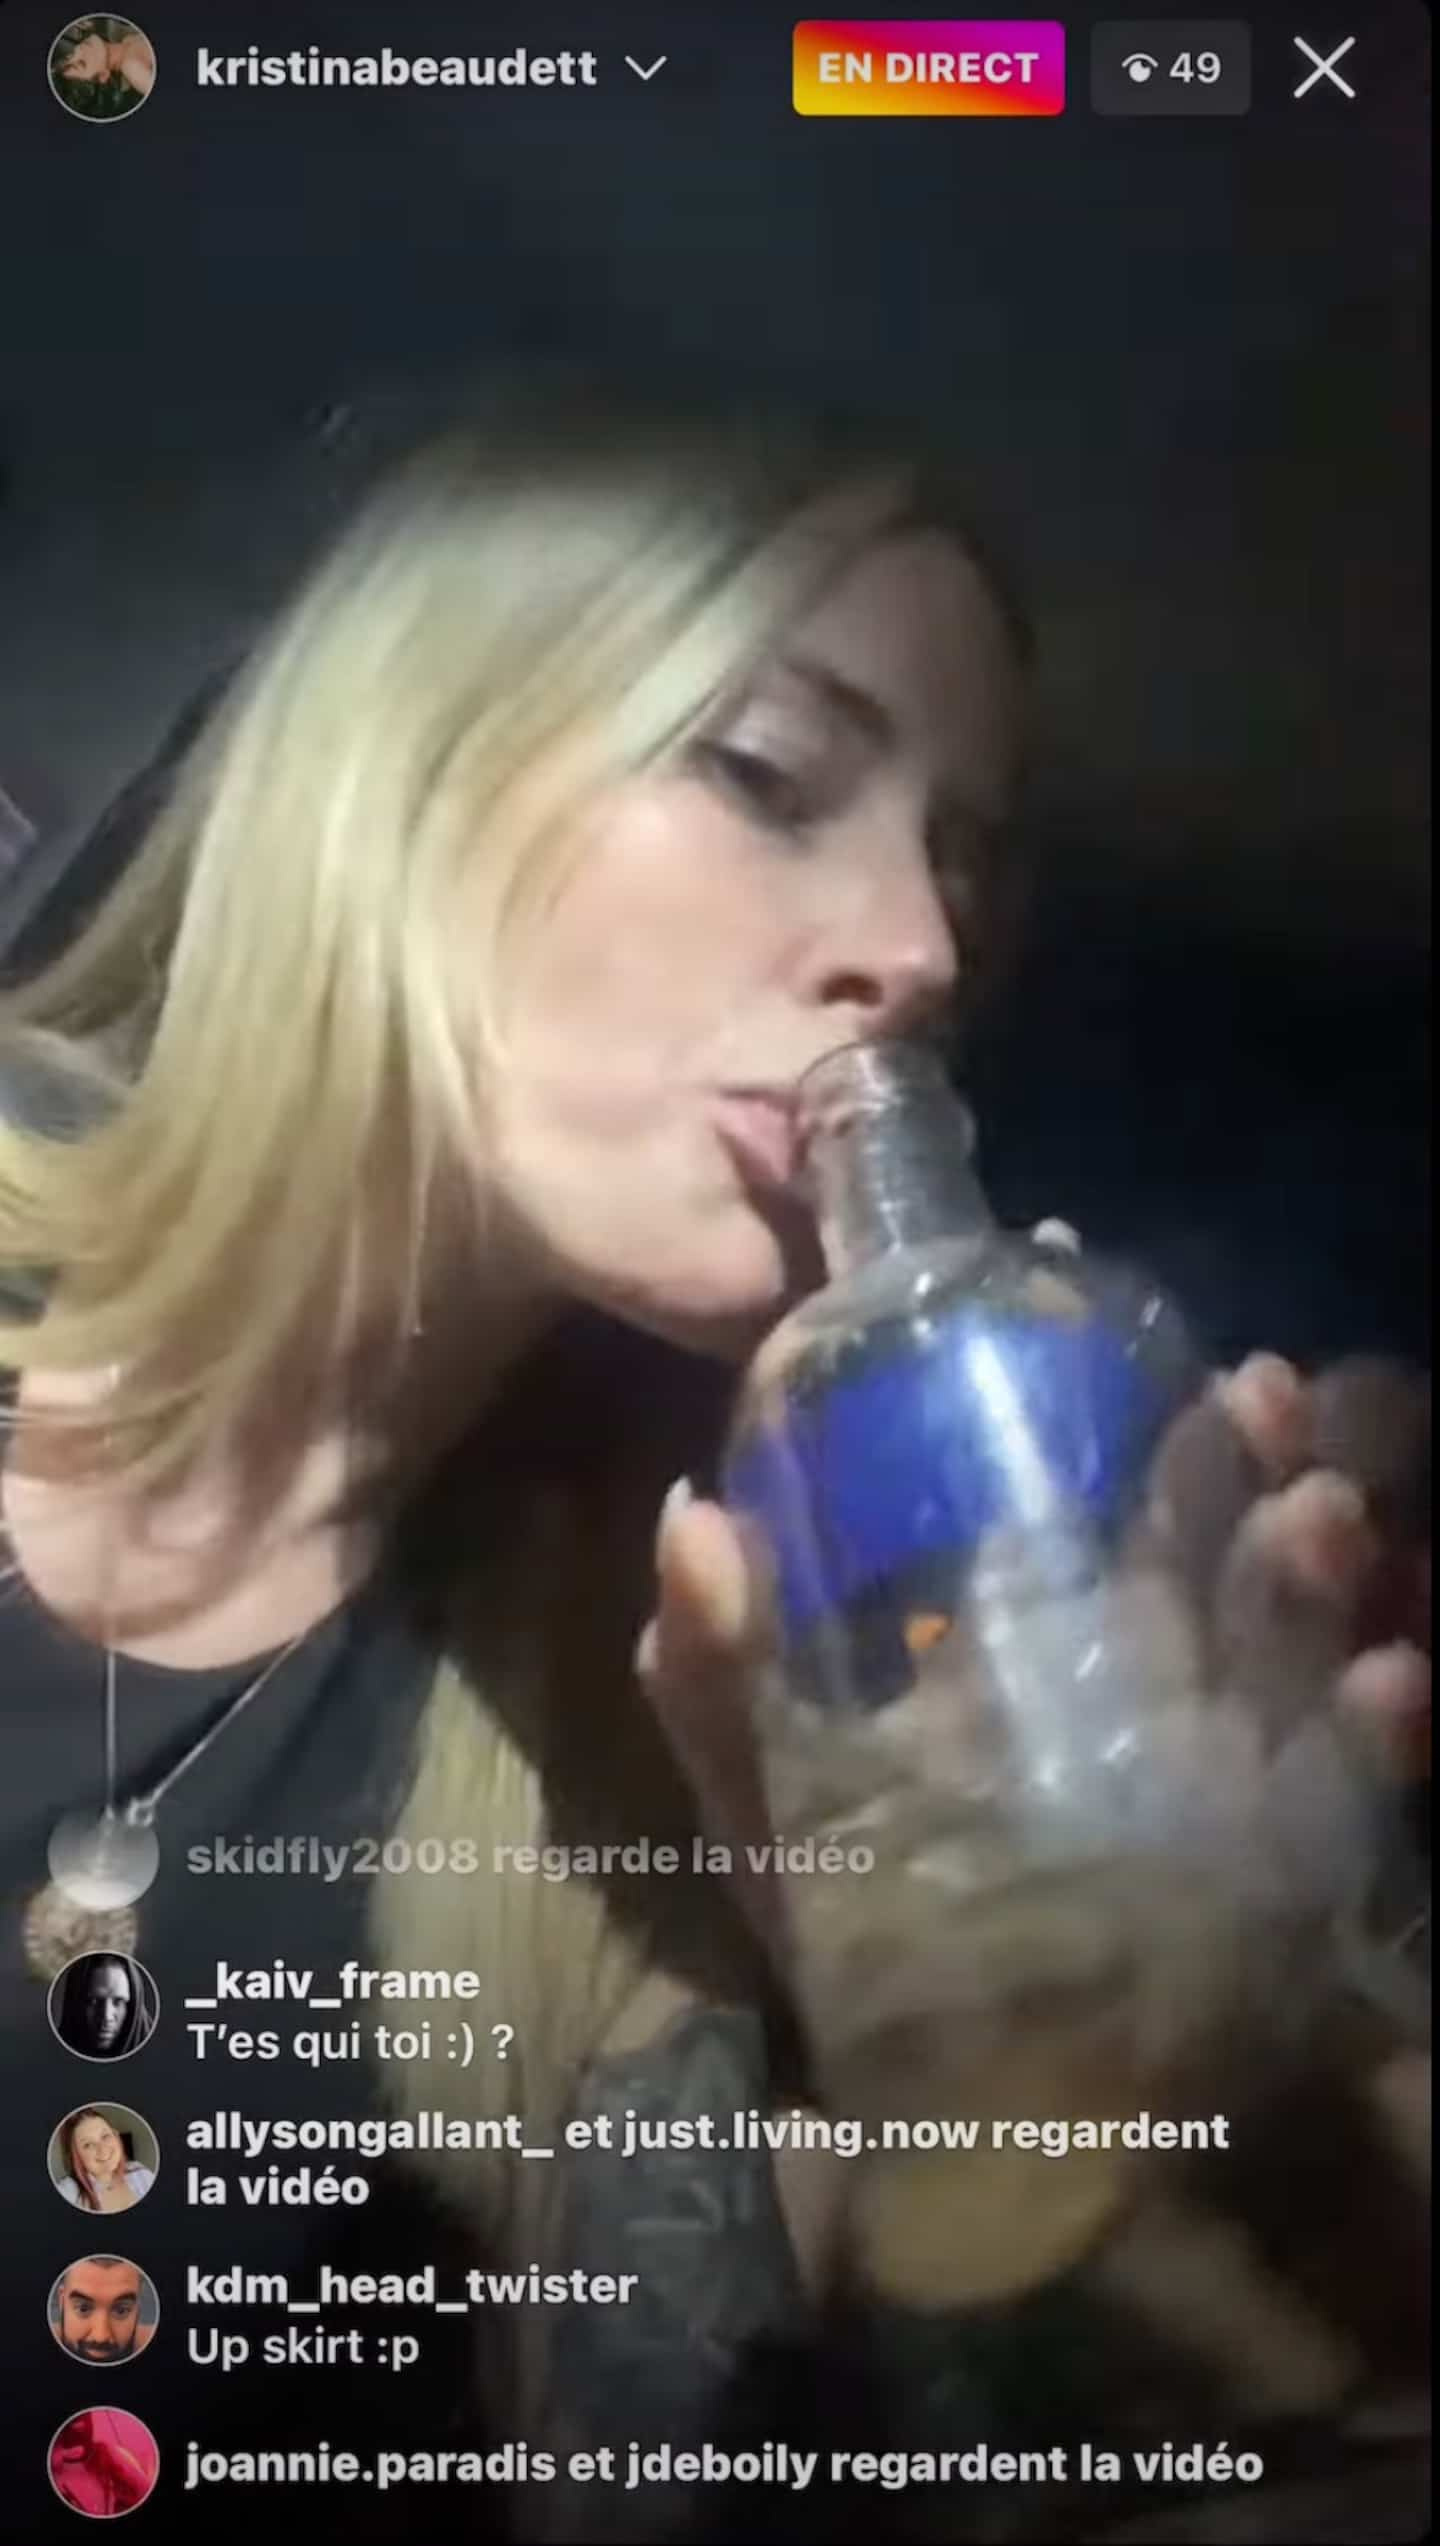 The “vaping influencer” films herself driving with a bottle of alcohol